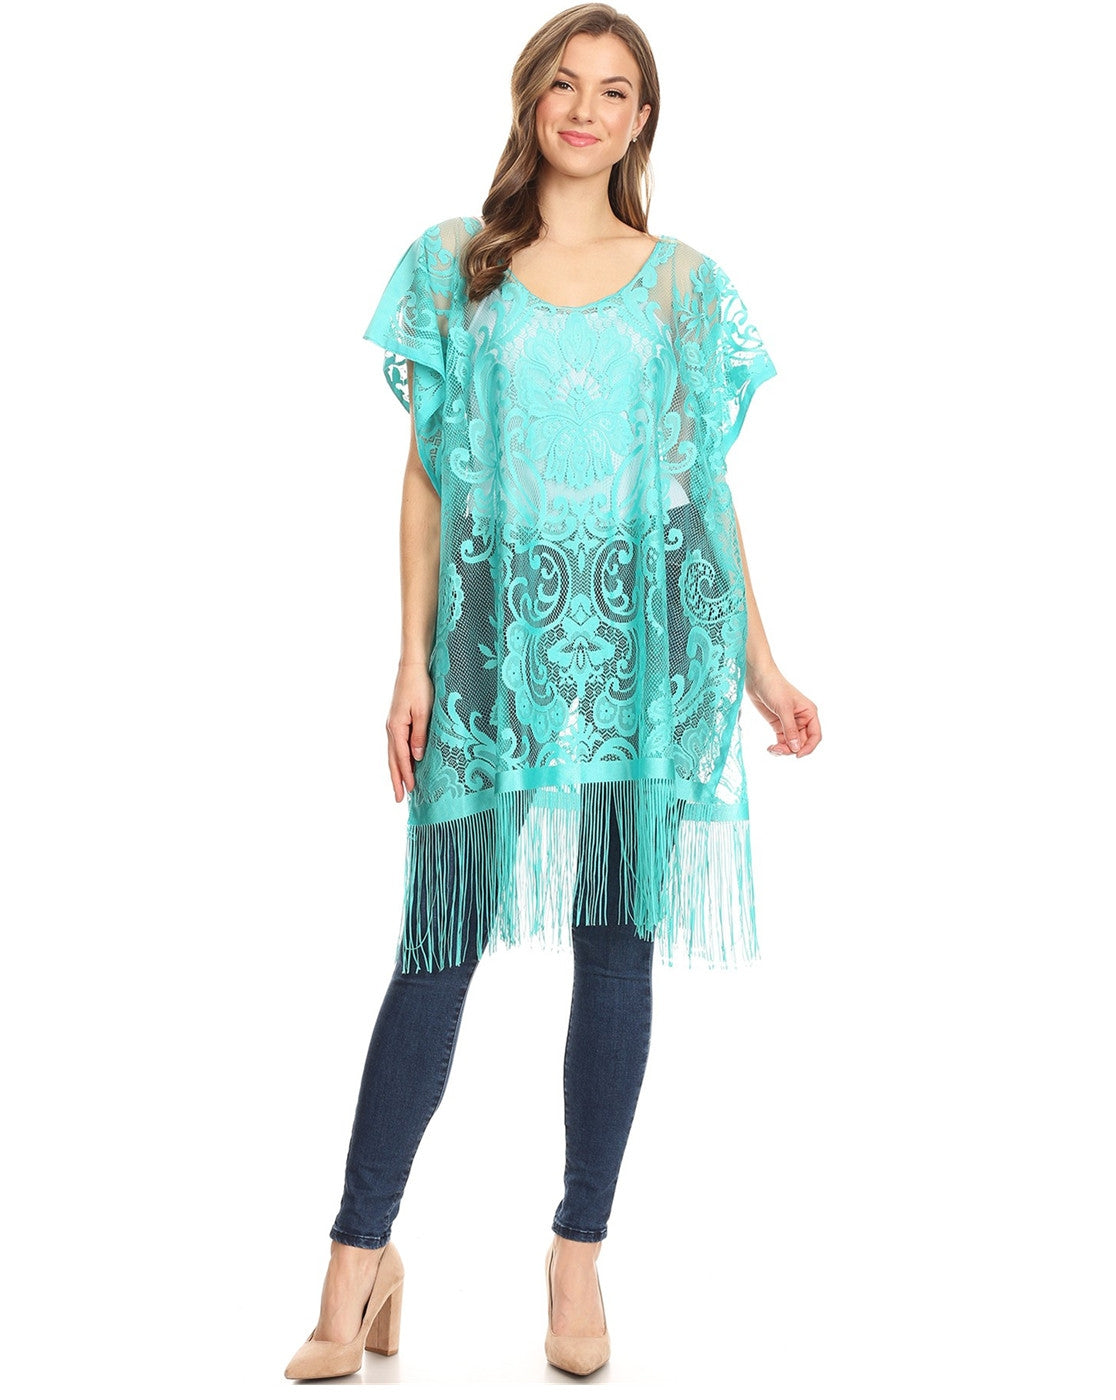 273 LACE TOP TURQUOISE